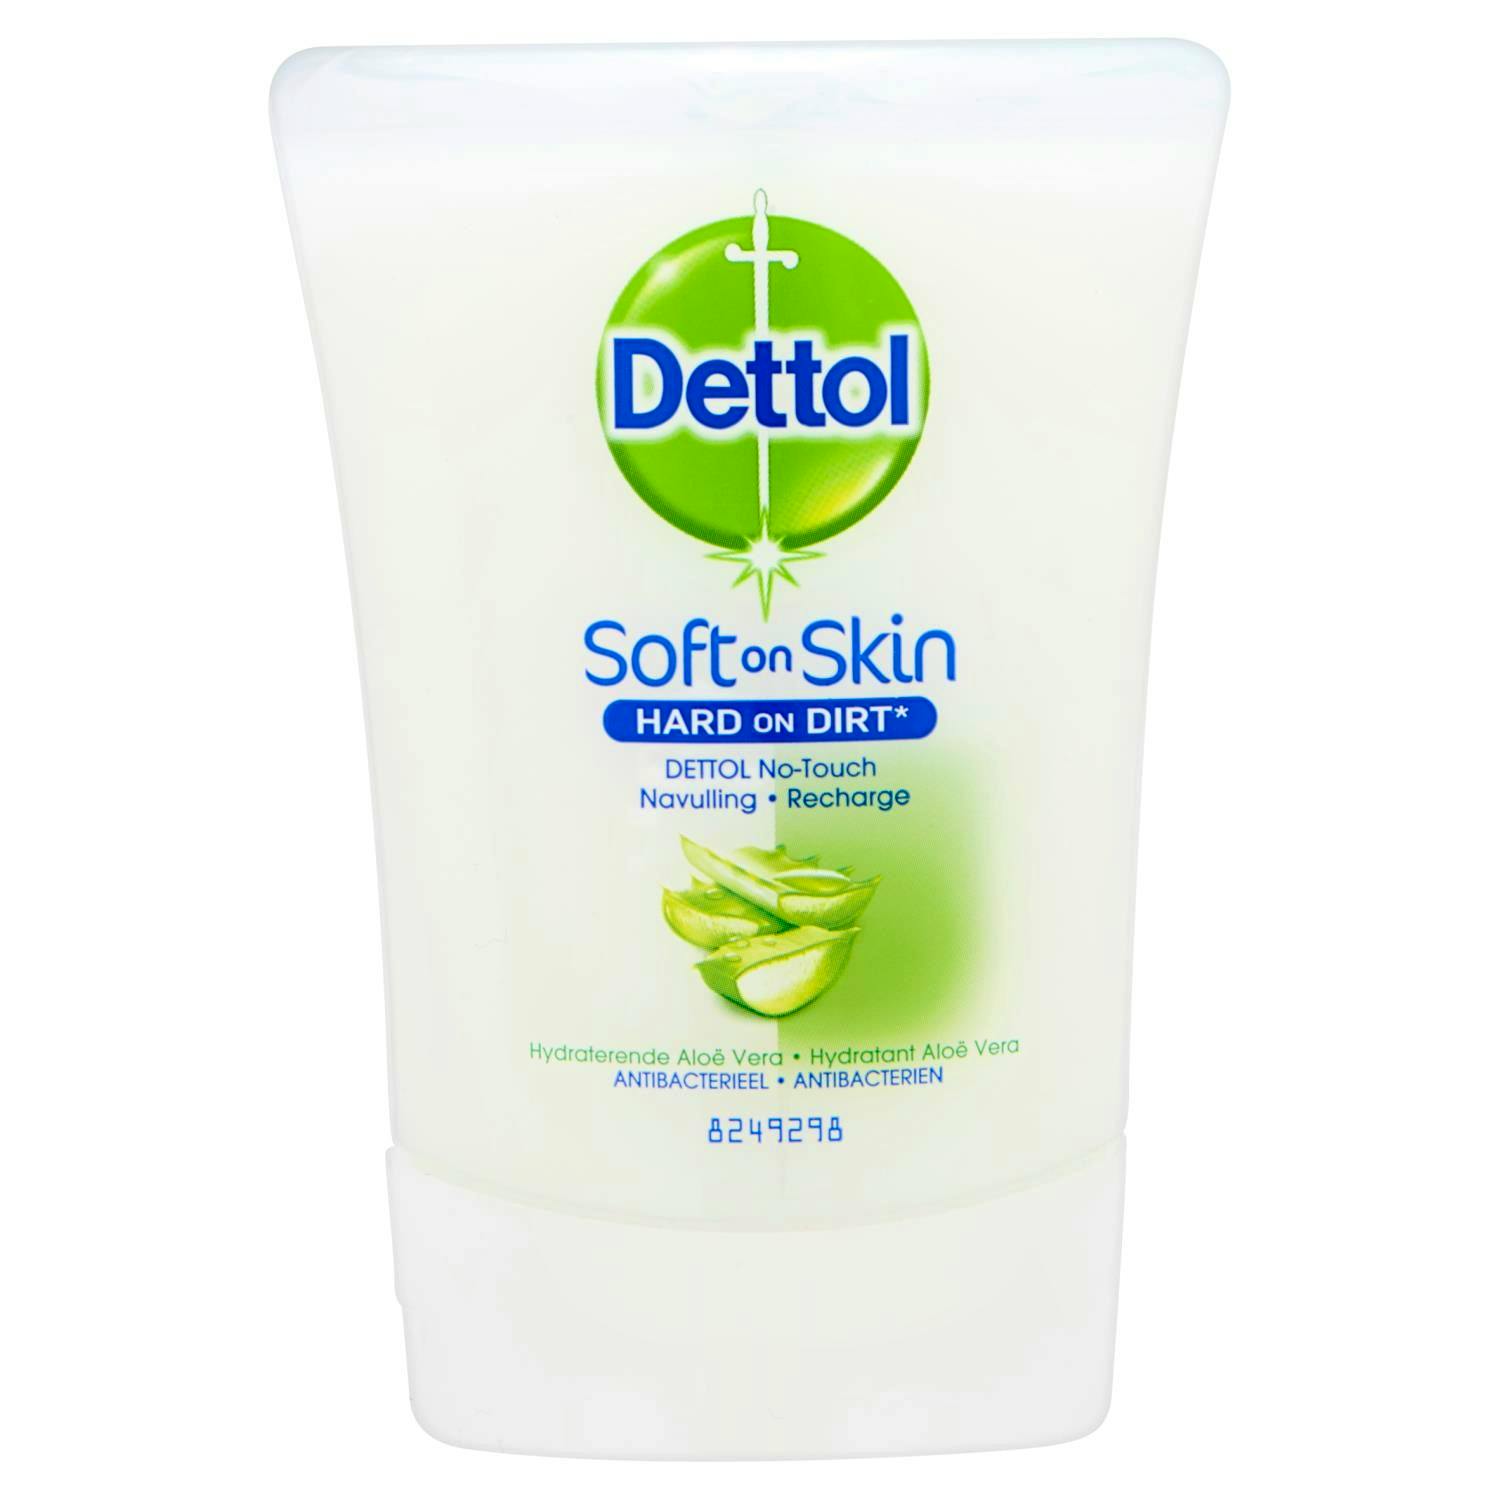 Packaging may vary 3 x Dettol No Touch Hand Wash System Refill Aloe Vera  250ml 5900627056655 